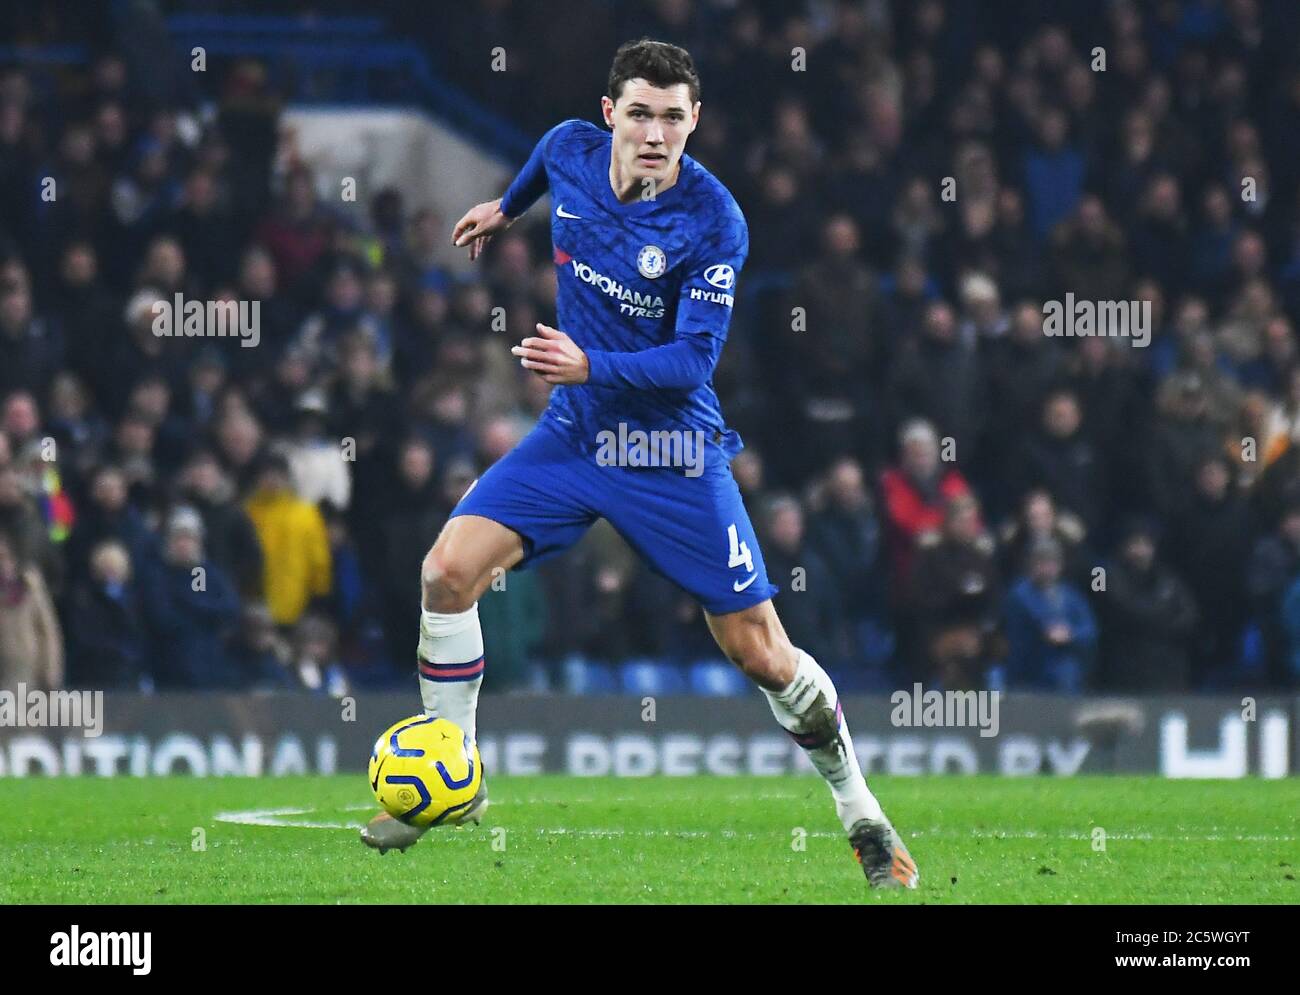 LONDON, ENGLAND - JANUARY 21, 2020: Andreas Christensen of Chelsea pictured during the 2019/20 Premier League game between Chelsea FC and Arsenal FC at Stamford Bridge. Stock Photo